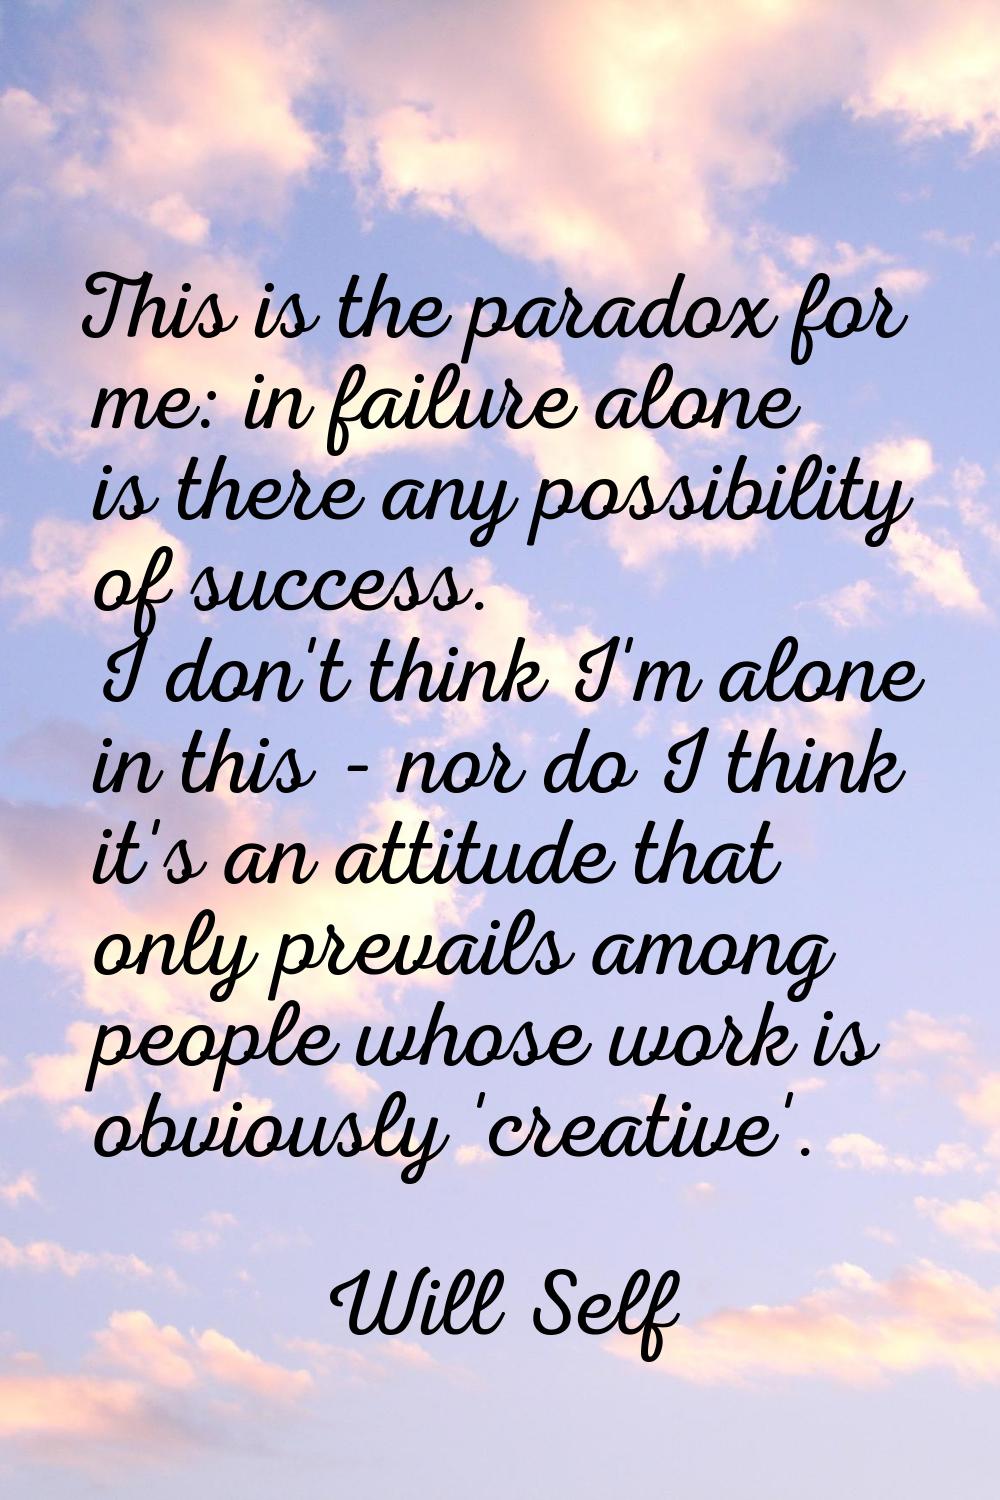 This is the paradox for me: in failure alone is there any possibility of success. I don't think I'm